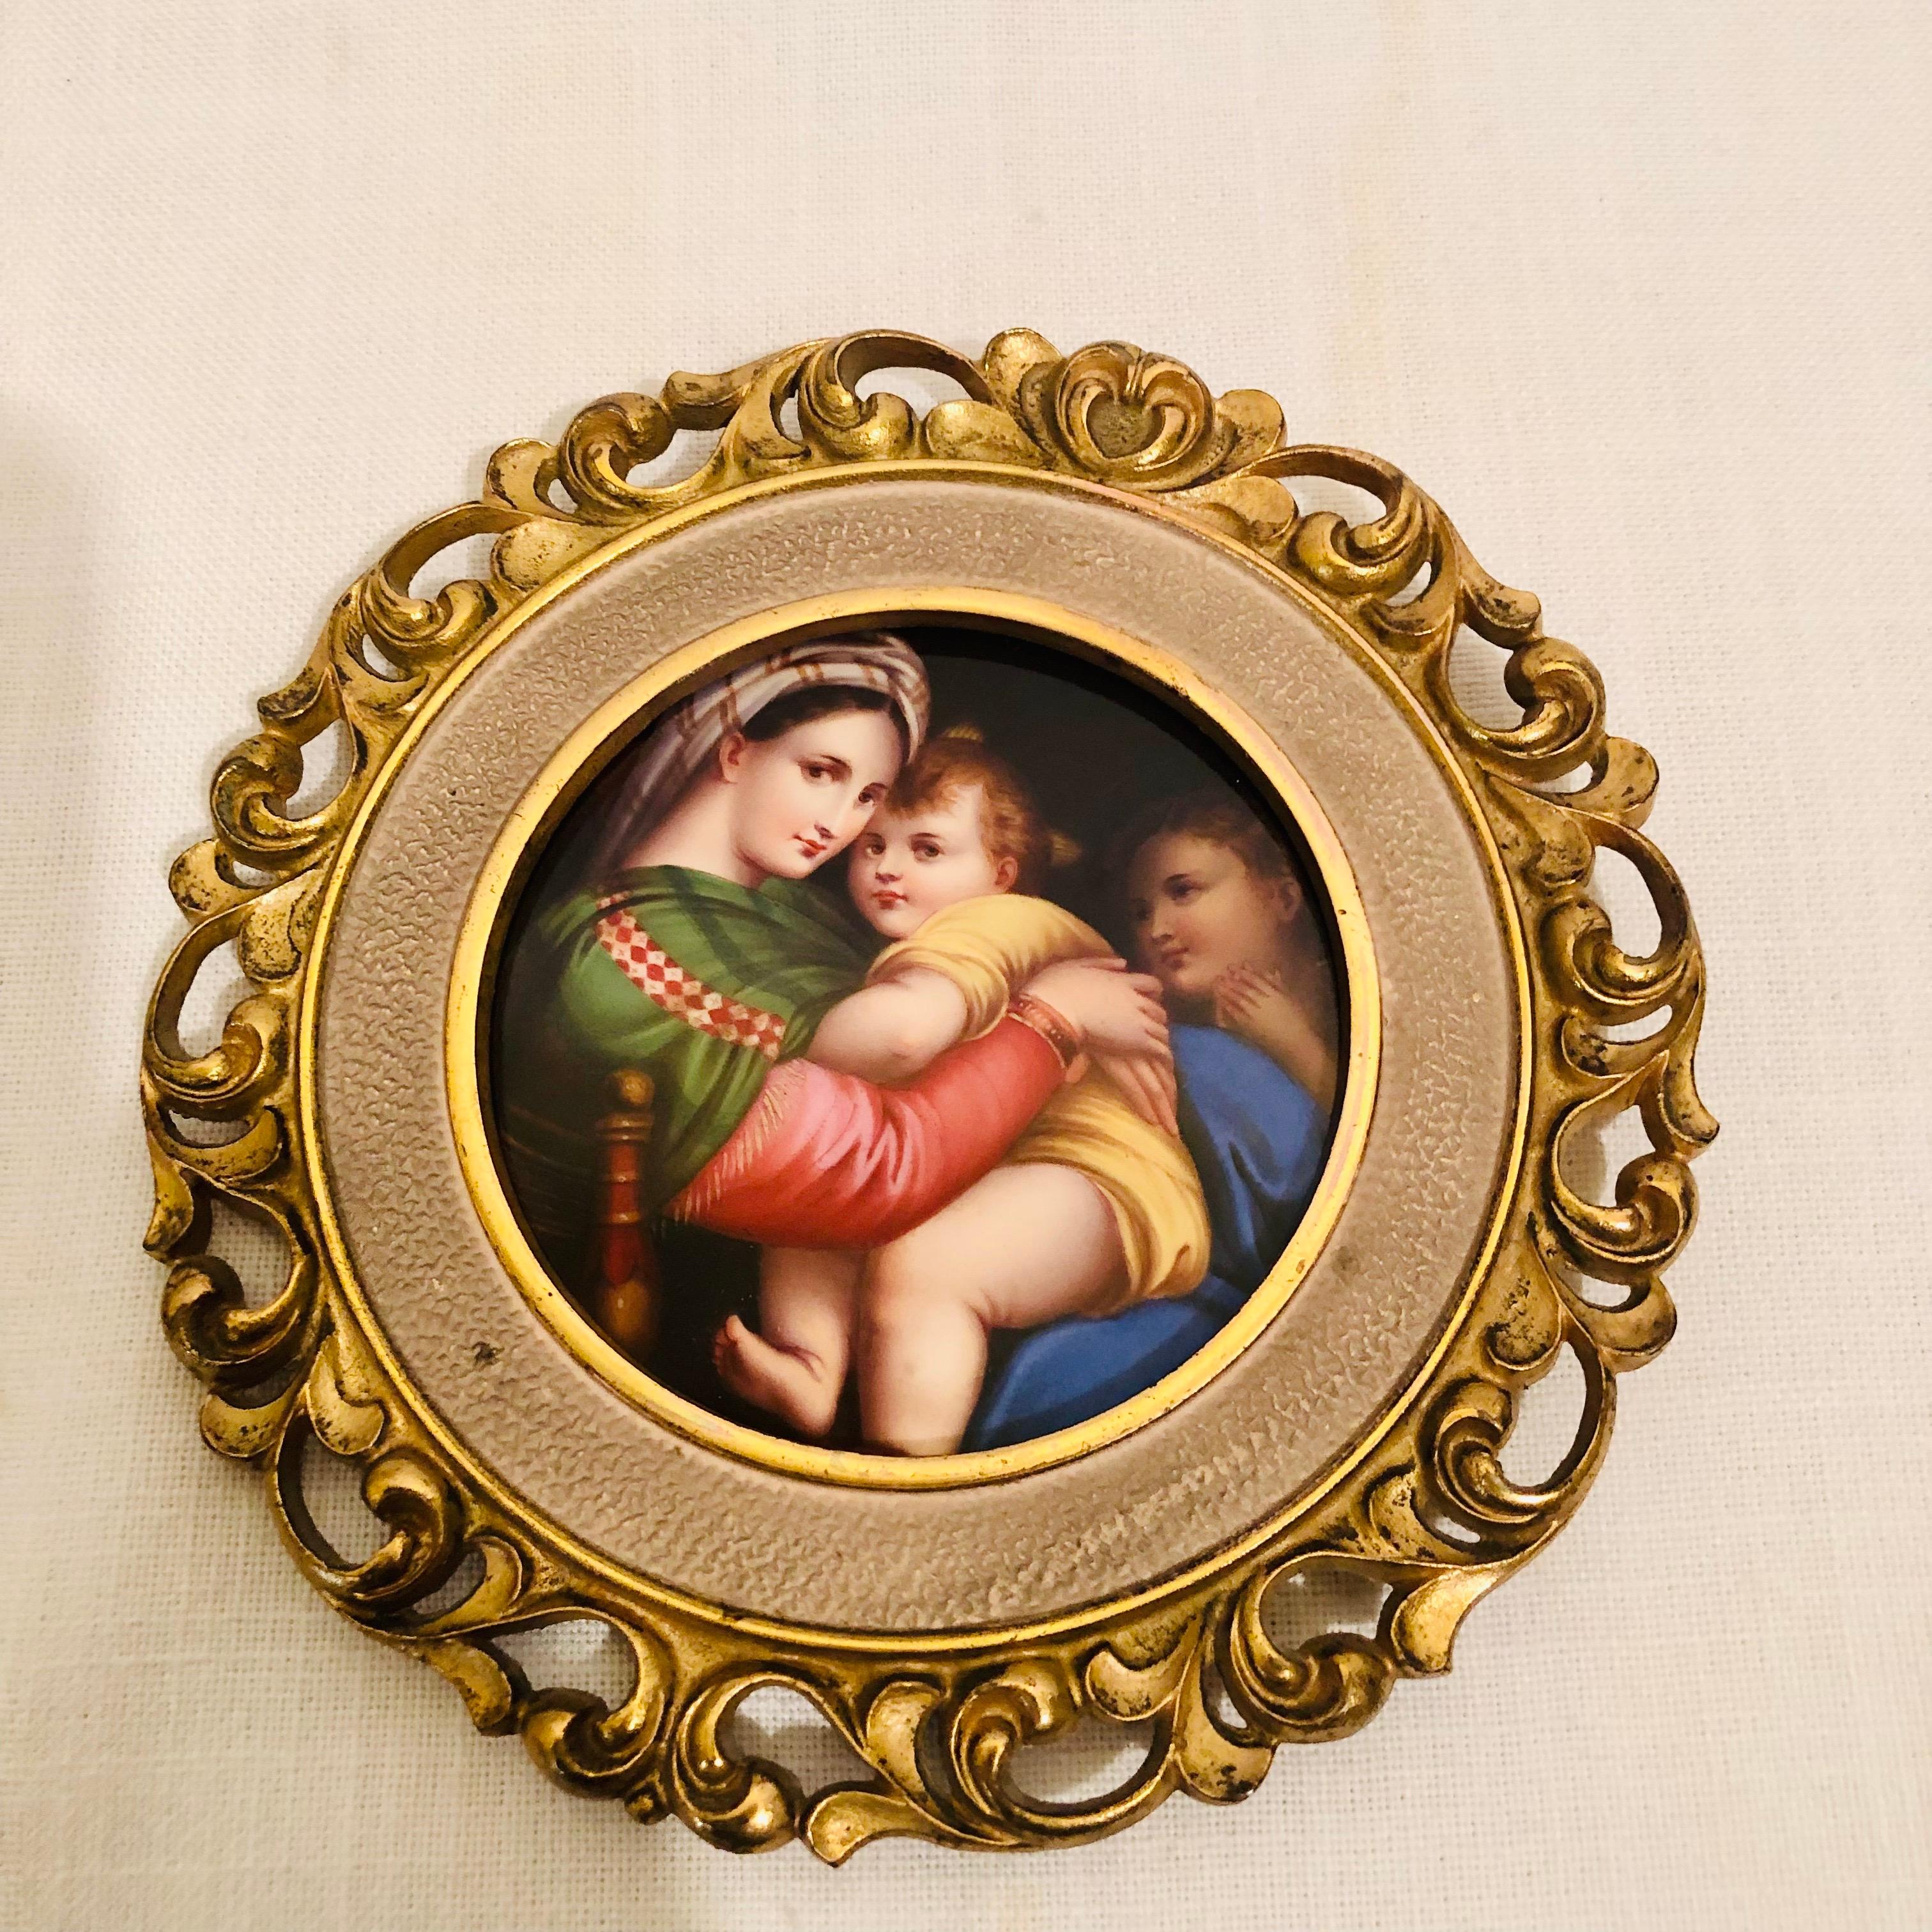 KPM Porcelain Plaque of Mary and Her Child after Madonna of the Chair Painting In Good Condition For Sale In Boston, MA